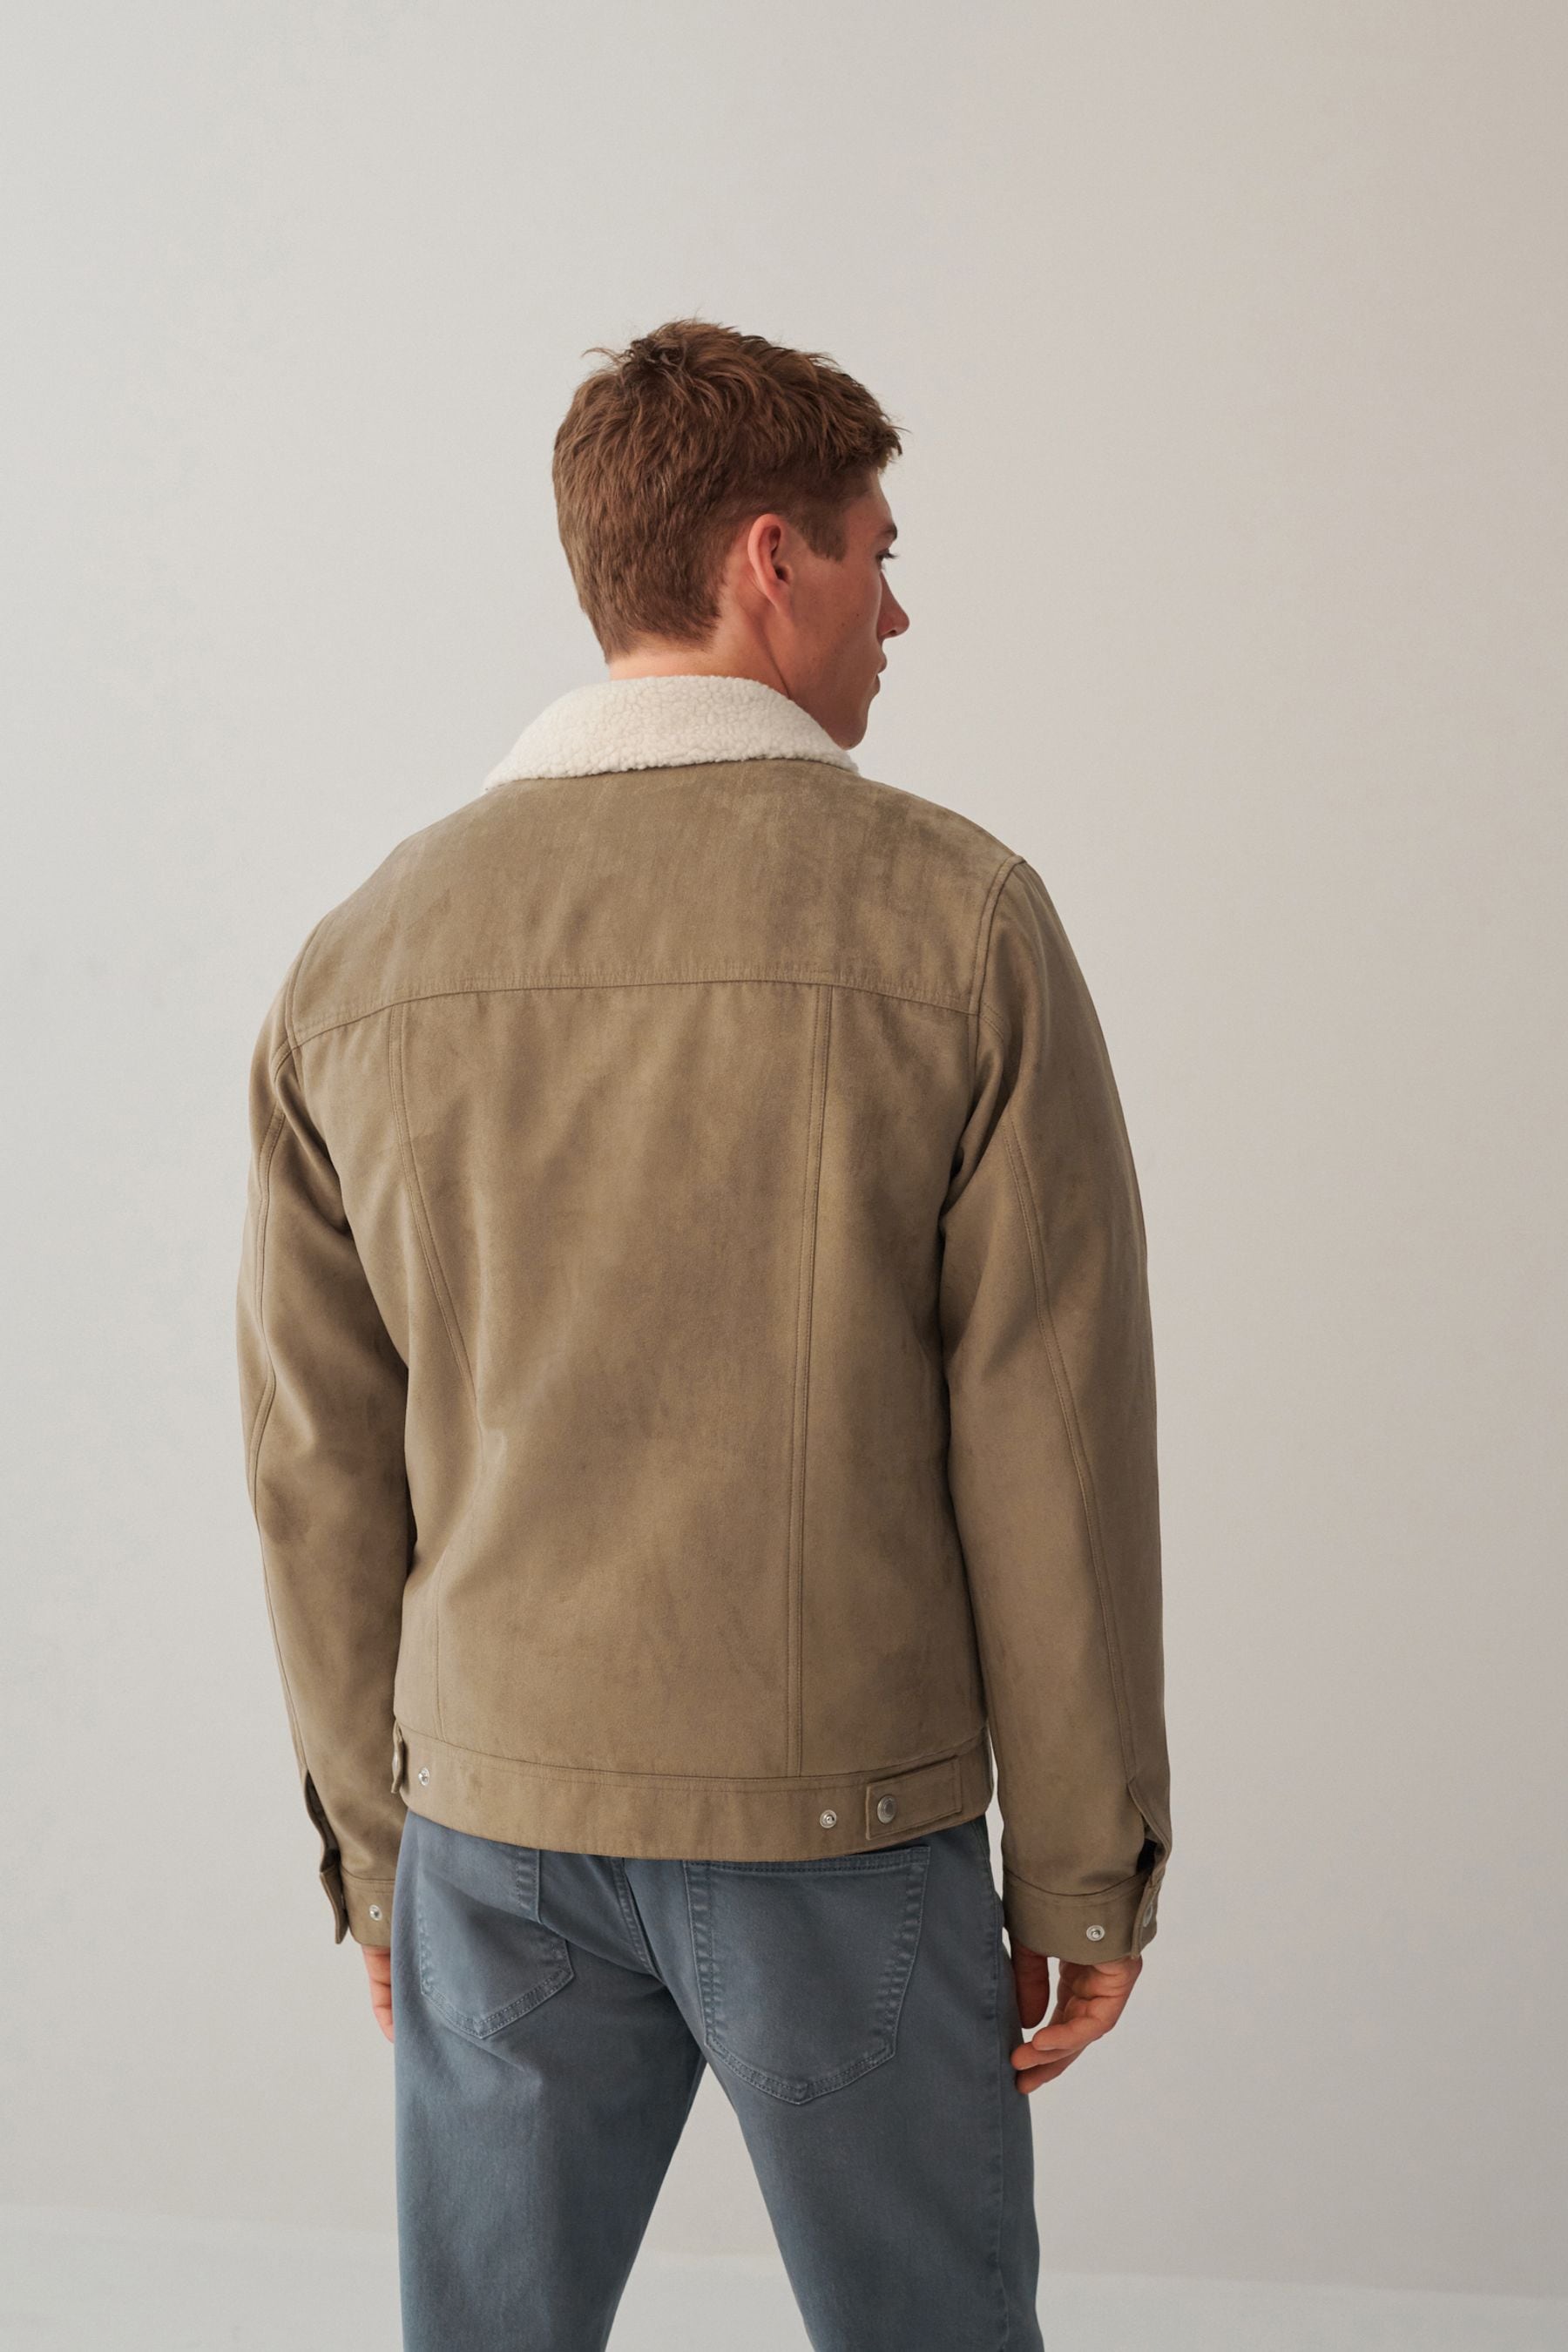 Buy Faux Suede Borg Collared Trucker Jacket from the Next UK online shop